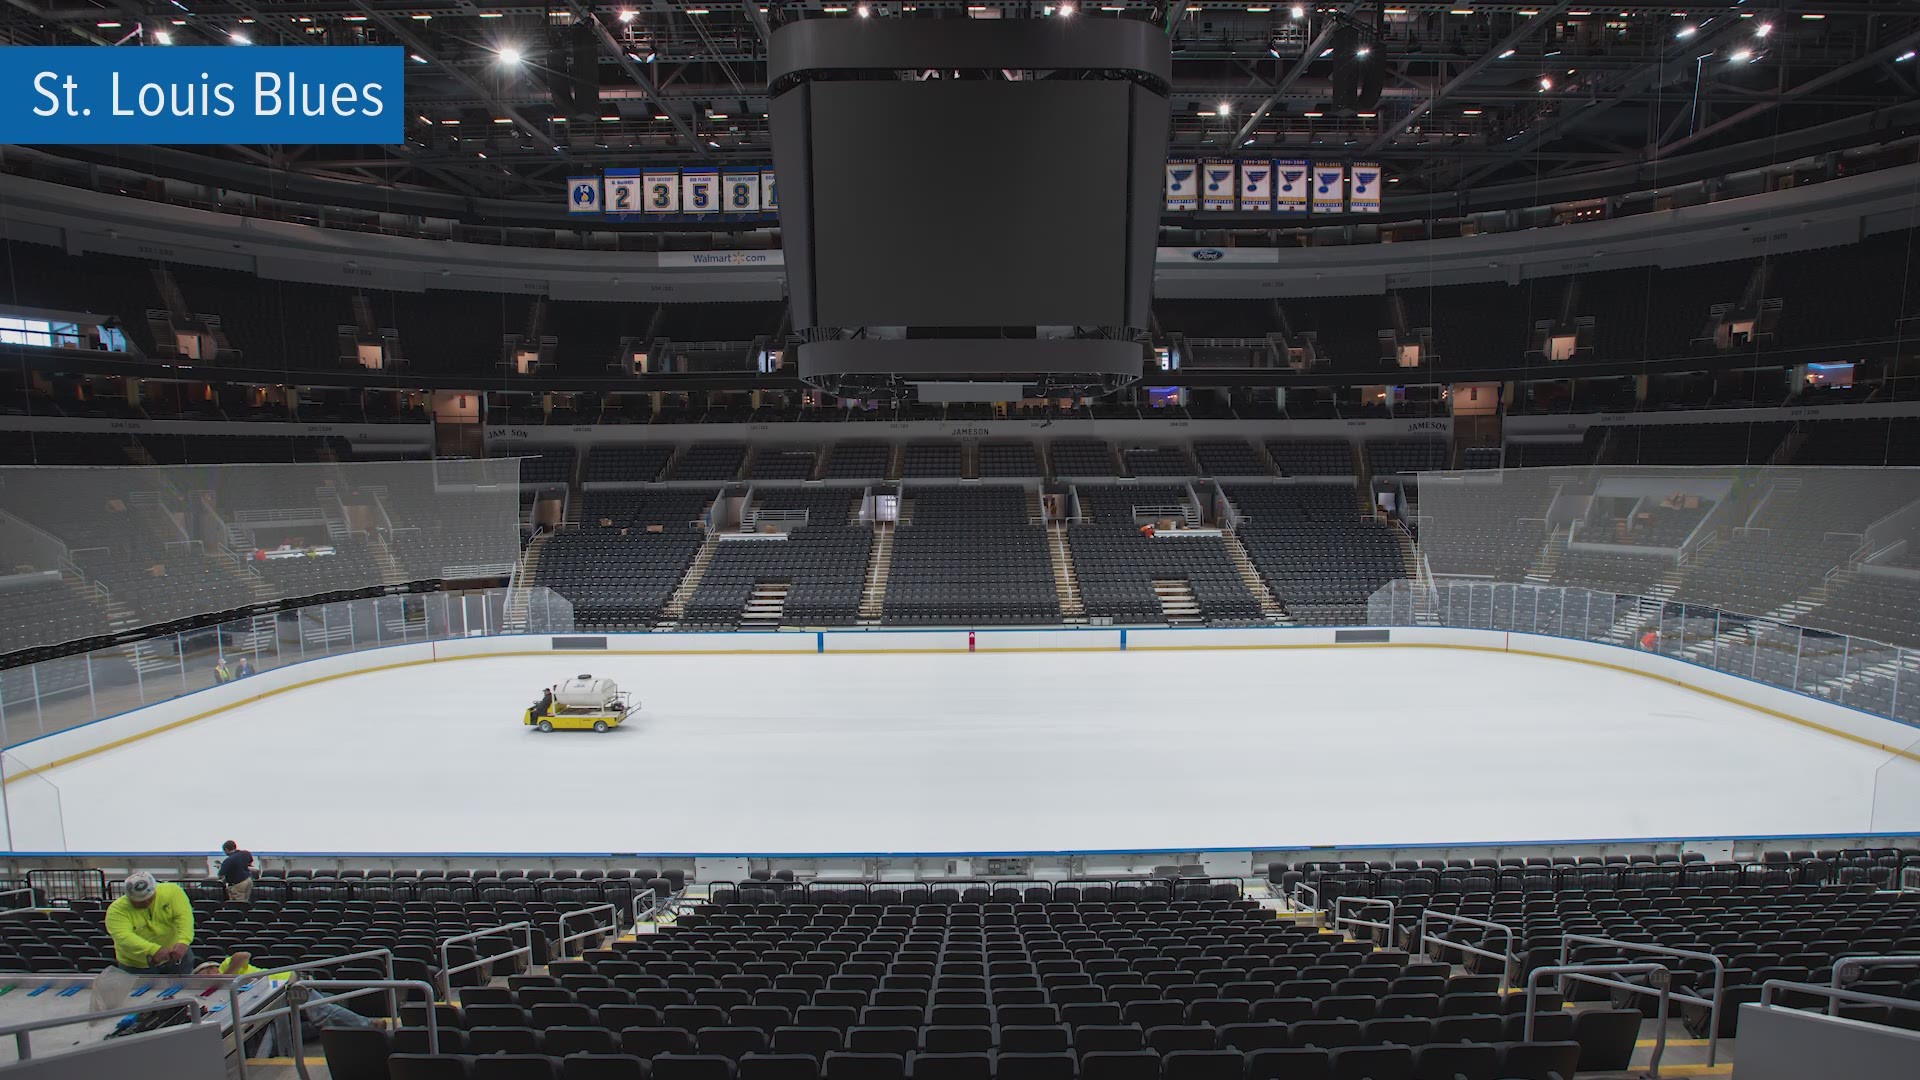 A new video from the team shows the arena crews prepping the Blue Note, red and blue lines and face-off circles. The crew was prepping the base layer before applying the ice on top.